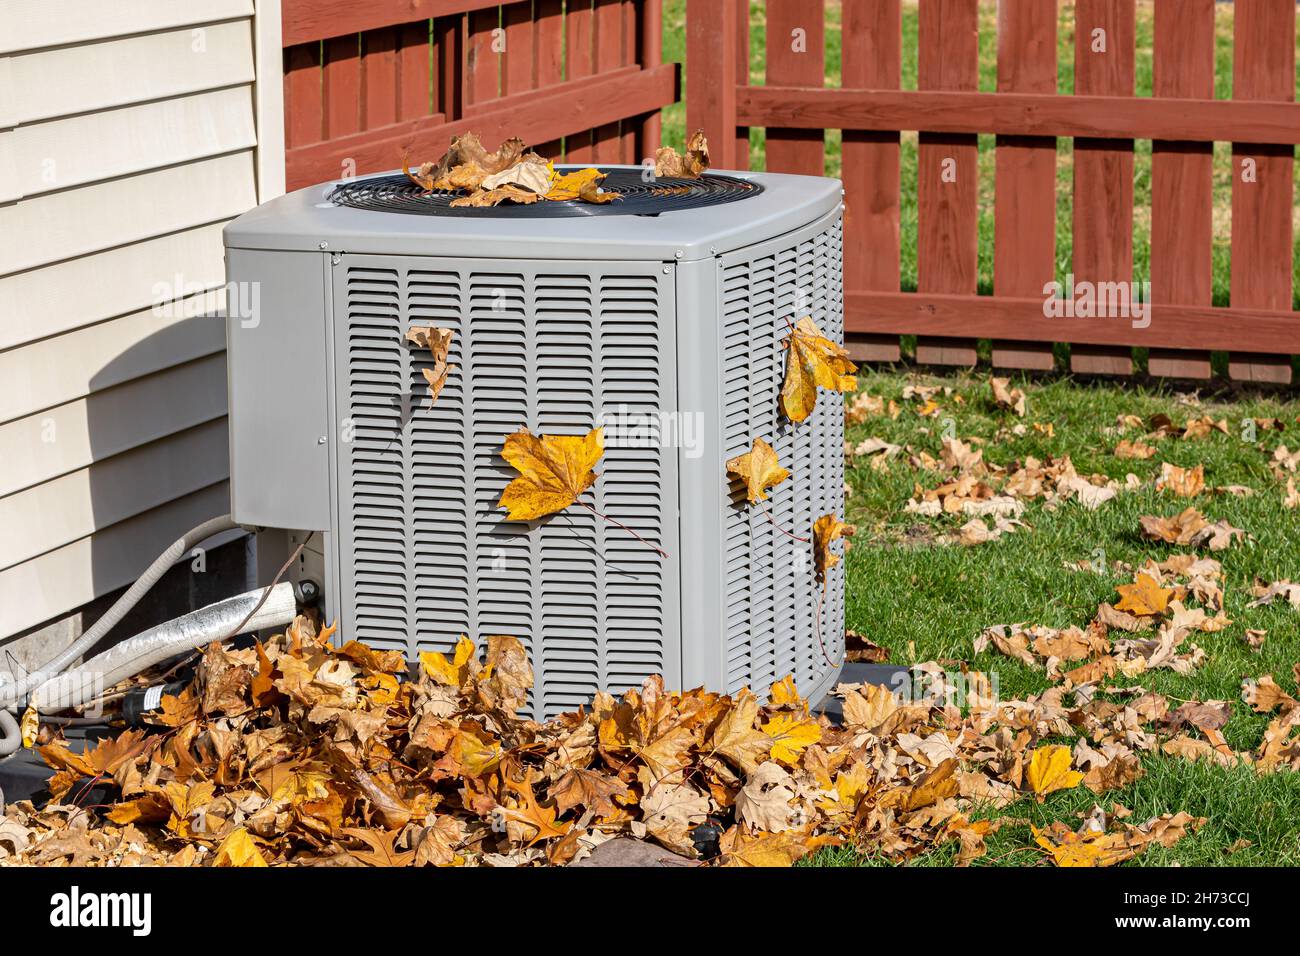 Dirty air conditioning unit covered in leaves during autumn. Home air conditioning, HVAC, repair, service, fall cleaning and maintenance concept. Stock Photo